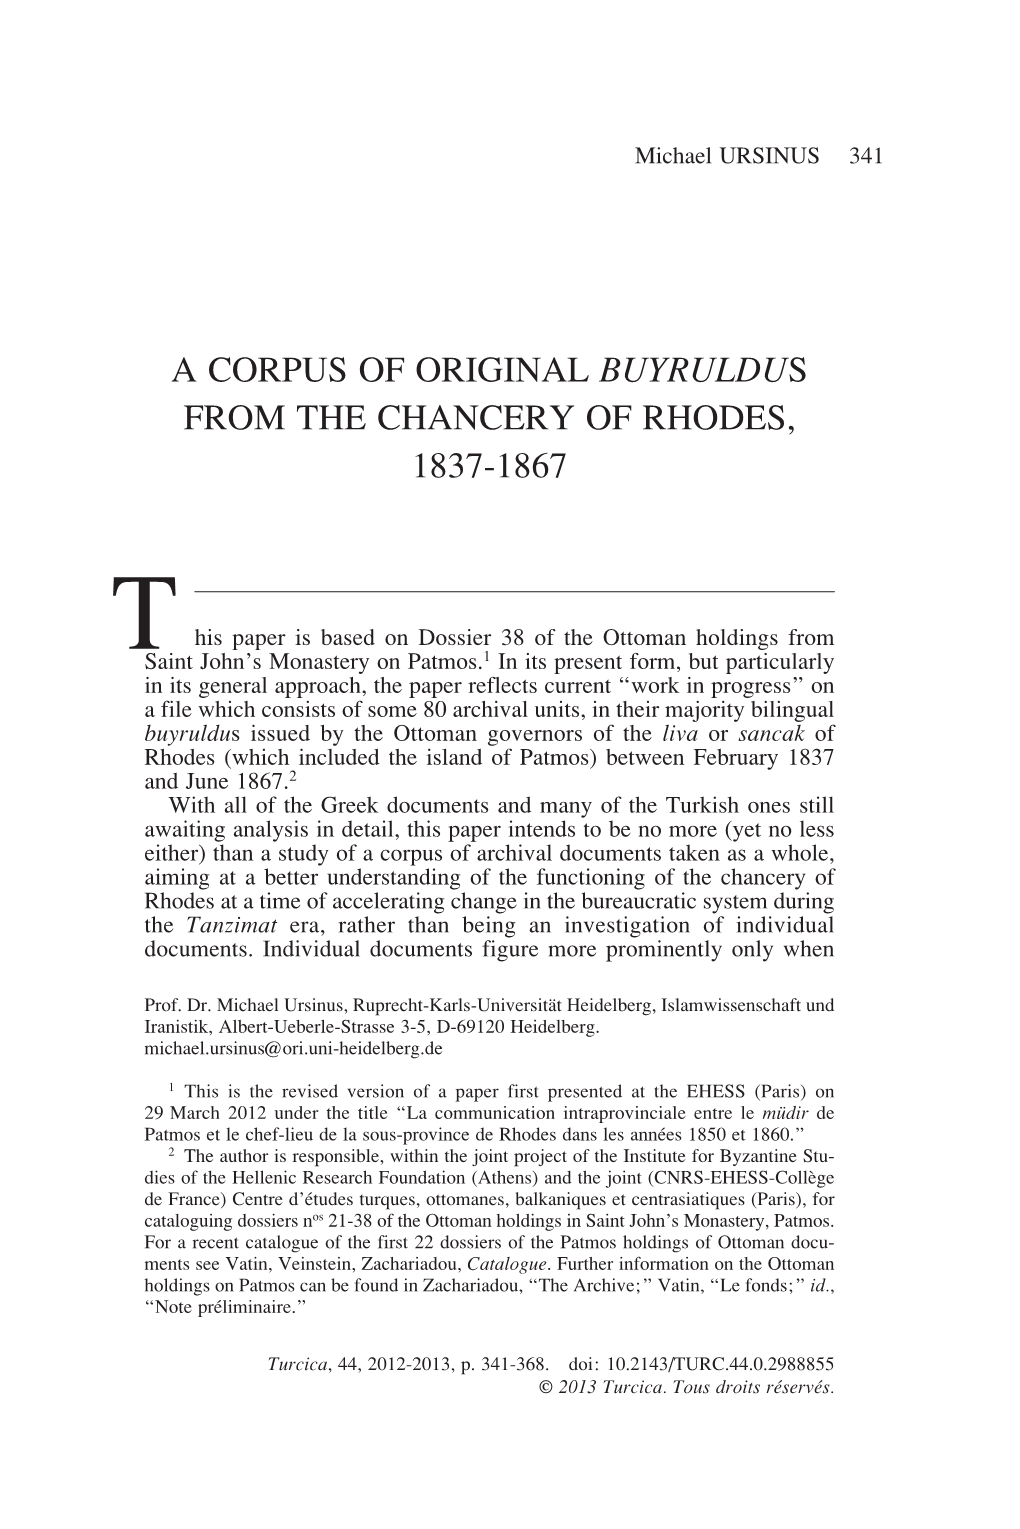 A Corpus of Original Buyruldus from the Chancery of Rhodes, 1837-1867